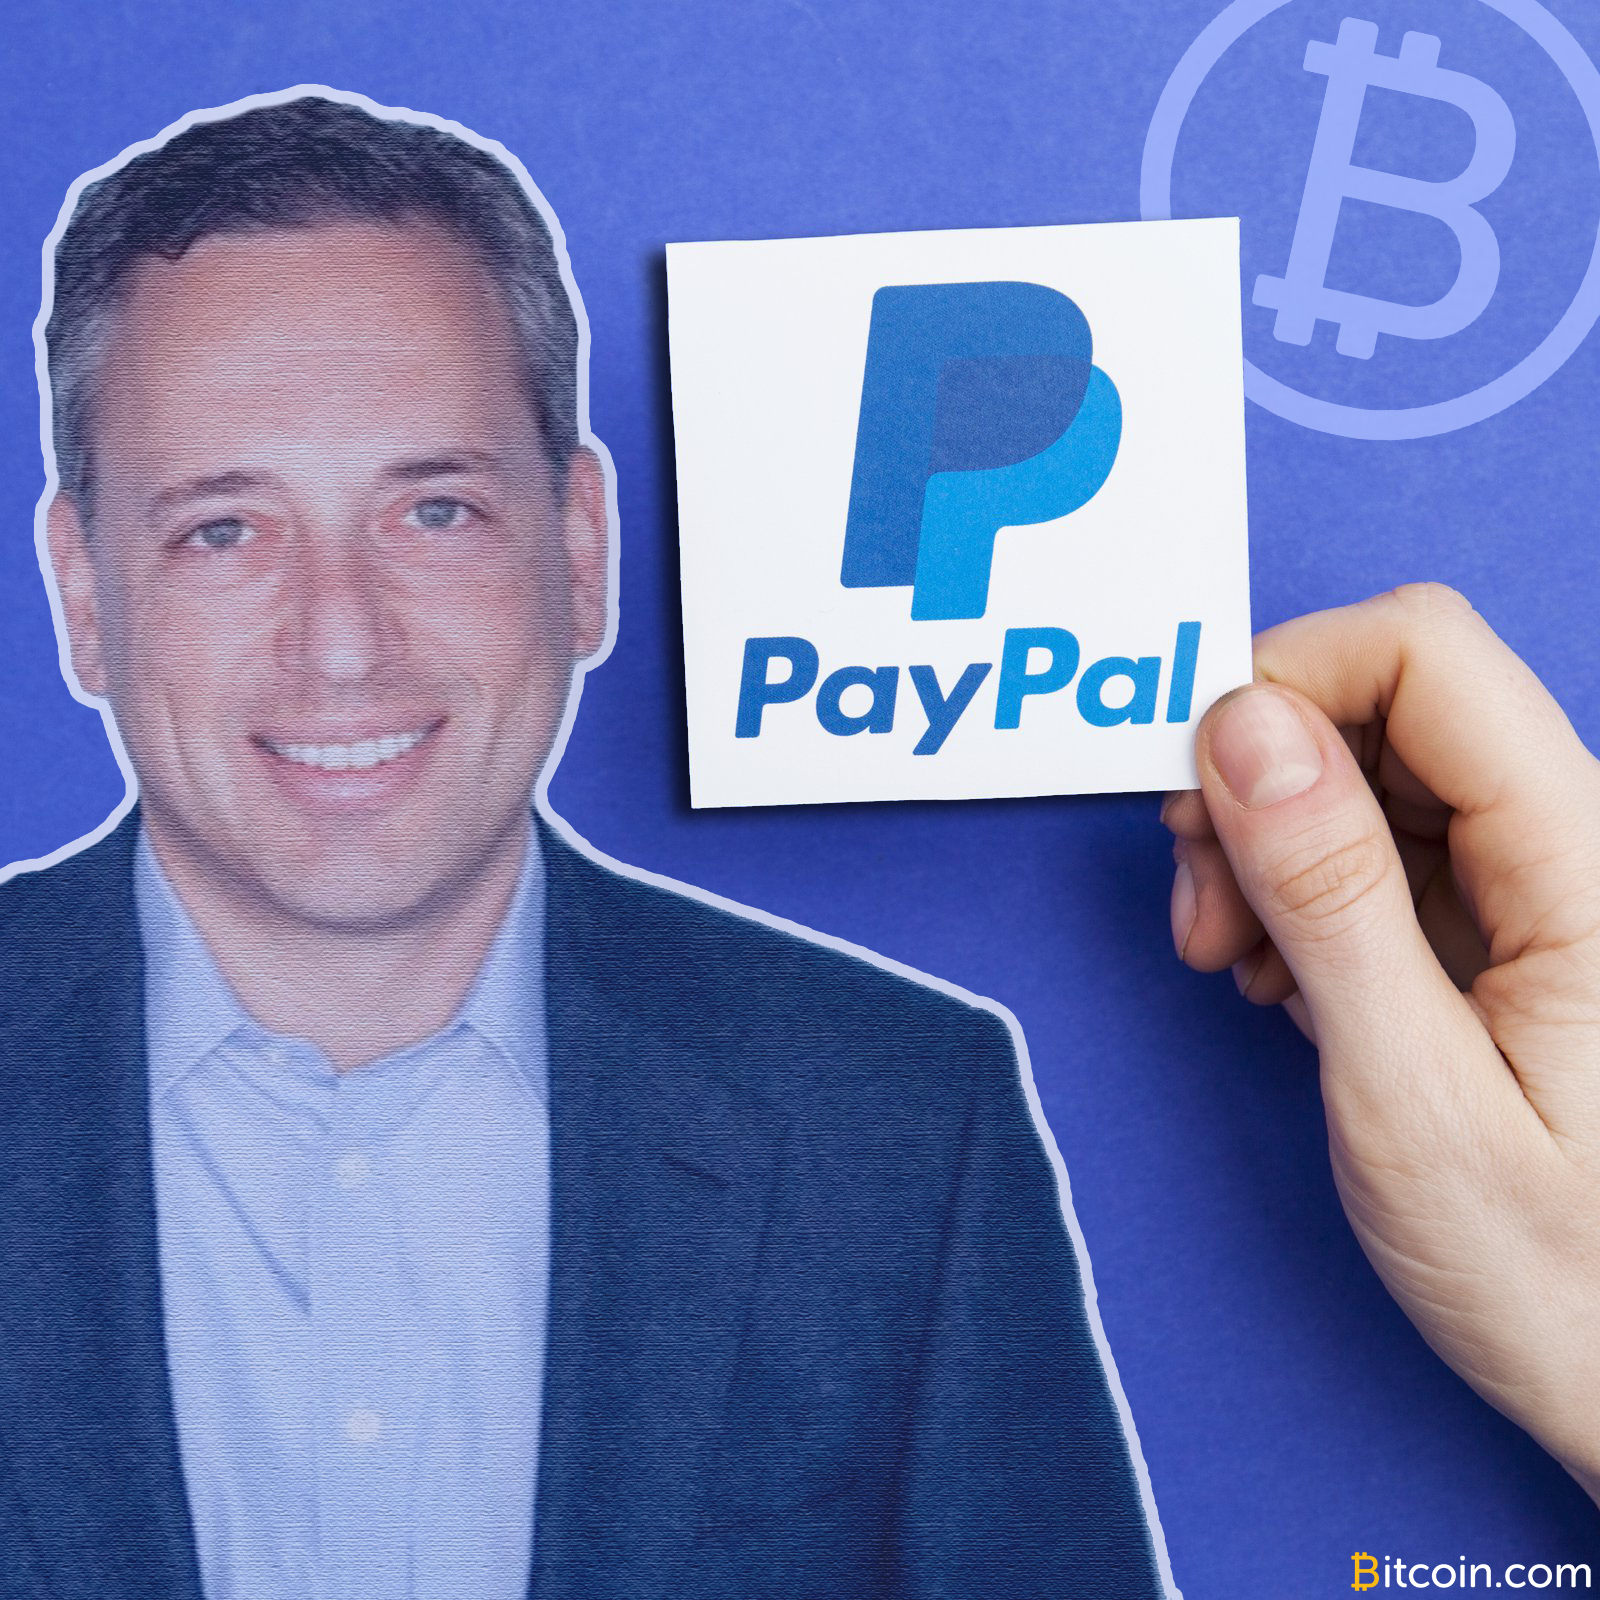 Former paypal COO David Sacks Discusses Bitcoin – Argues ICOs Are Threat to VCs